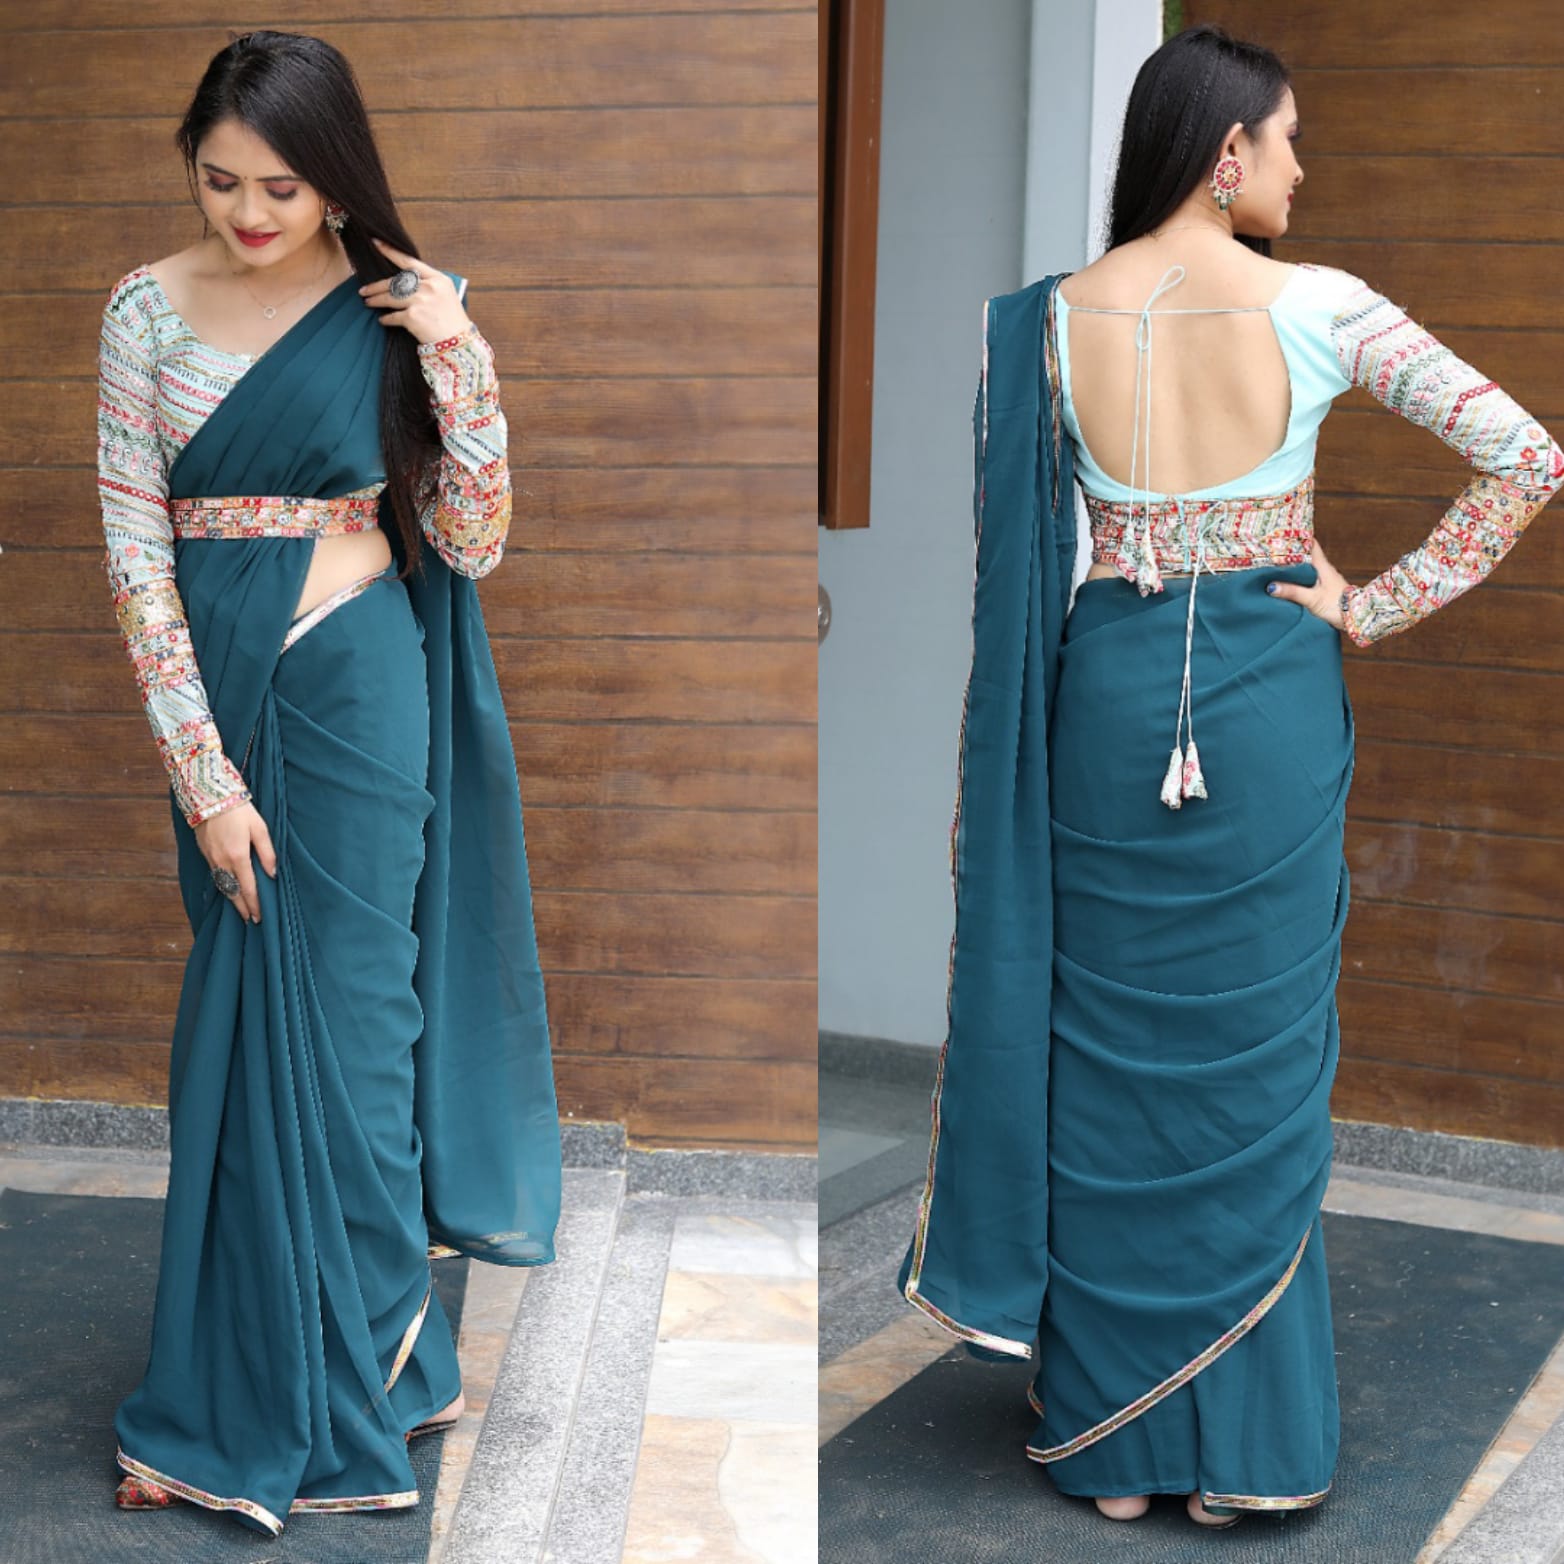 Exclusive Teal Blue Color Plain Saree With Work Blouse